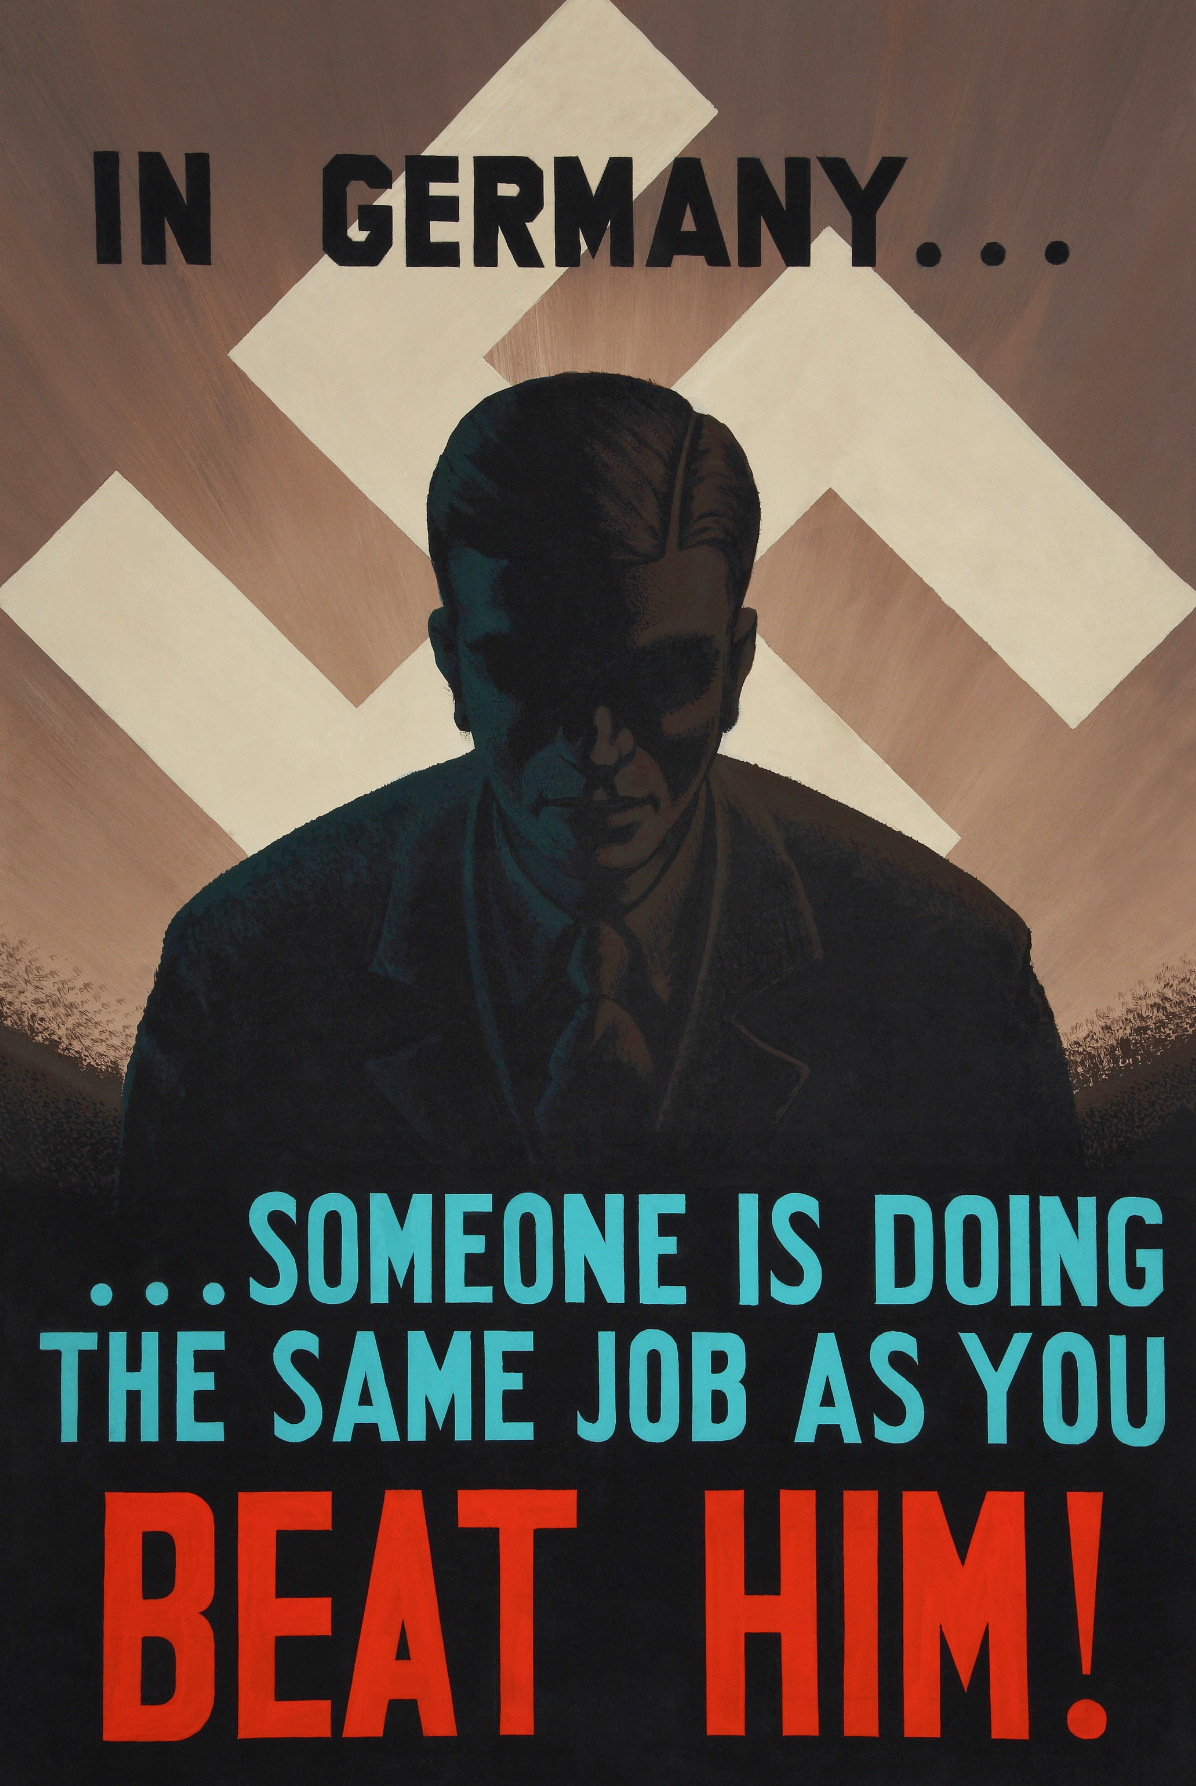 In Germany someone is doing the same job as you. Beat him! — British World War Two poster